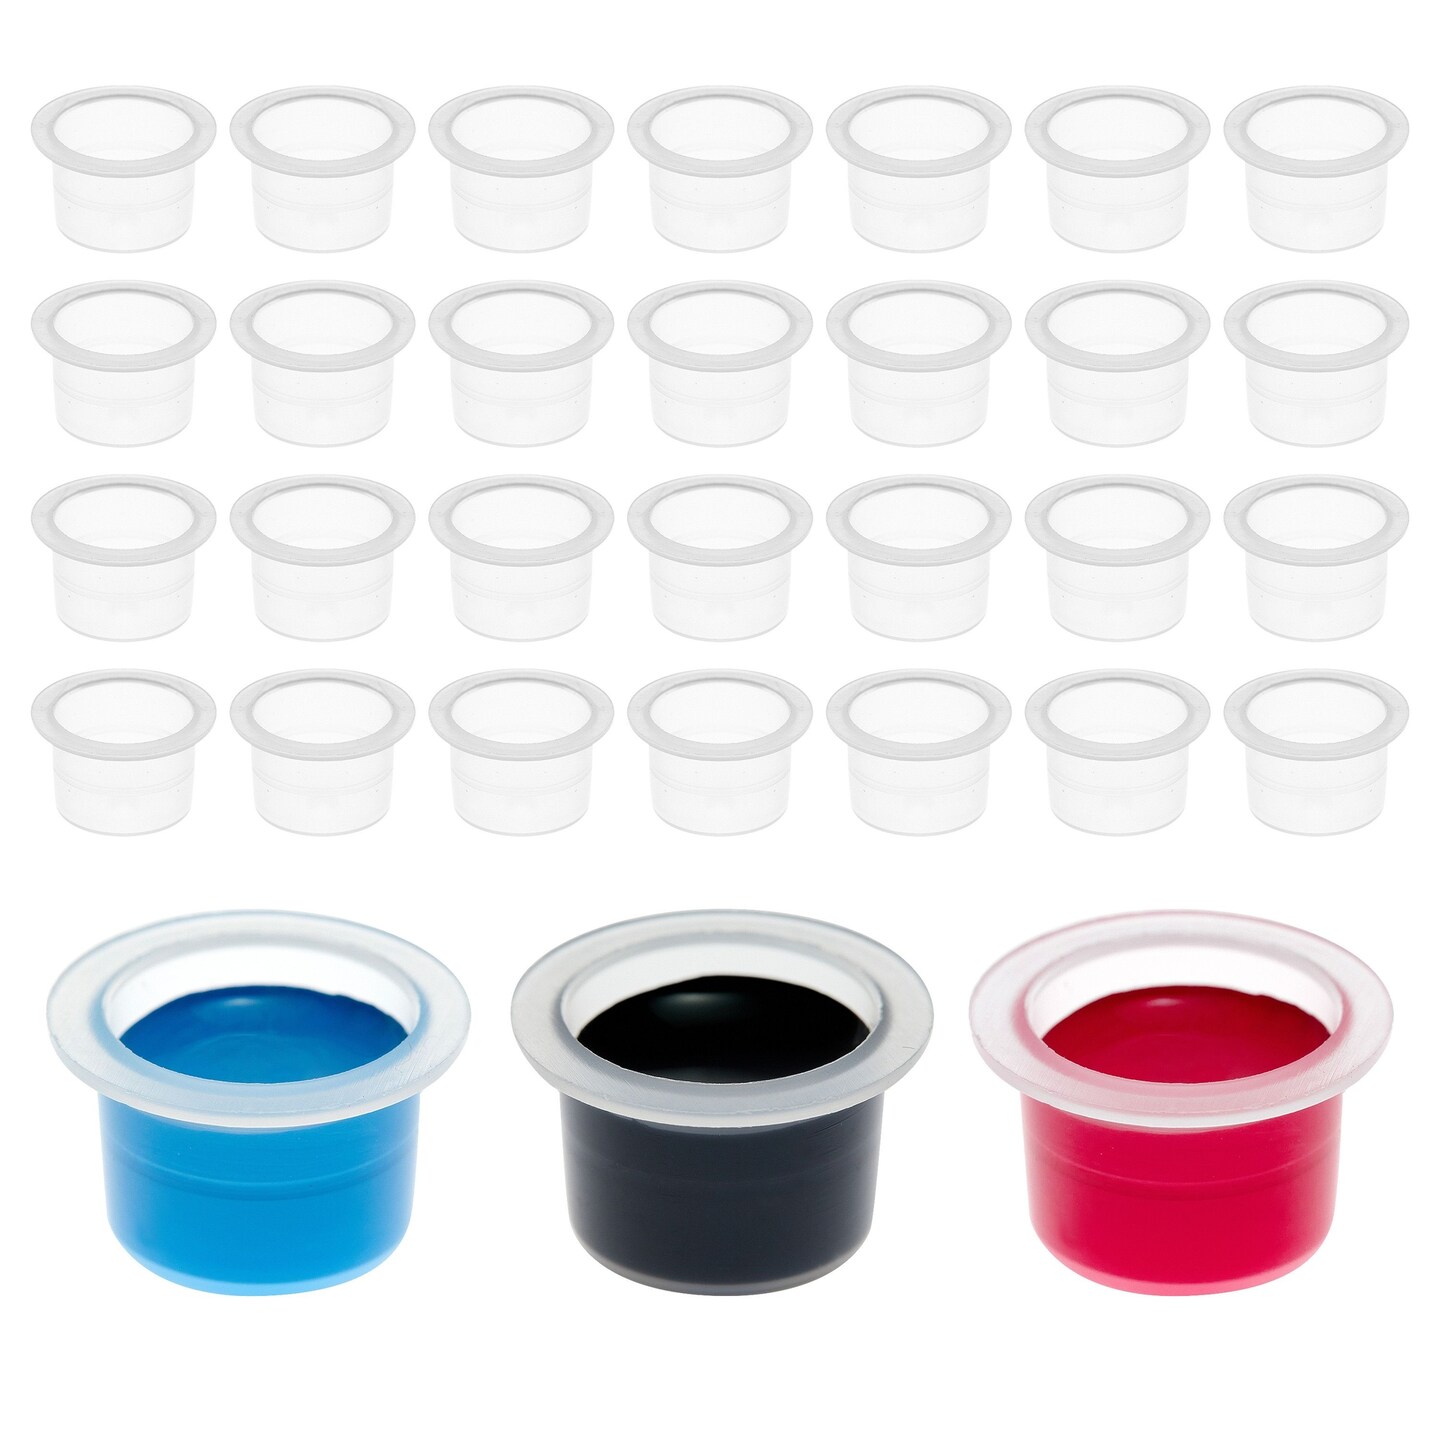 1000 Pack Medium Disposable Tattoo Ink Caps, Pigment Cups for Microblading (17mm)